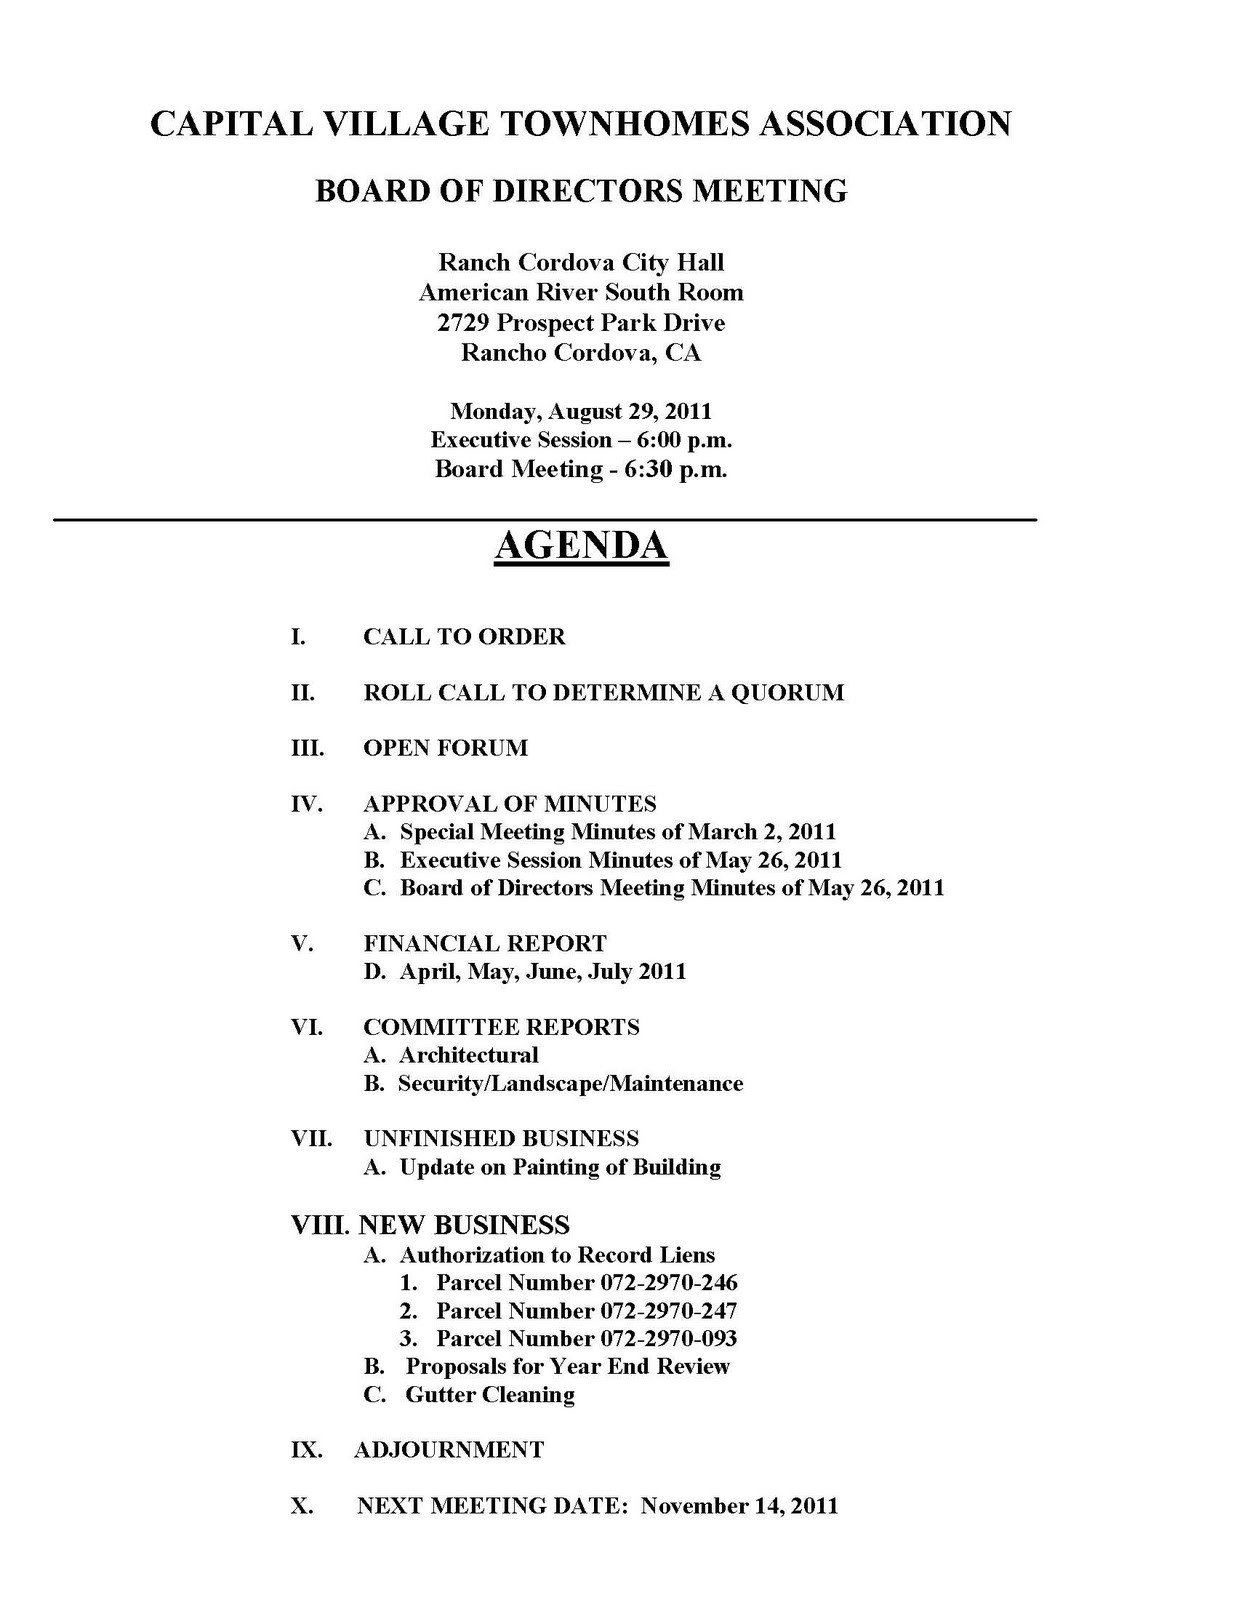 Capital Village Townhome HOA Board Meeting Monday August